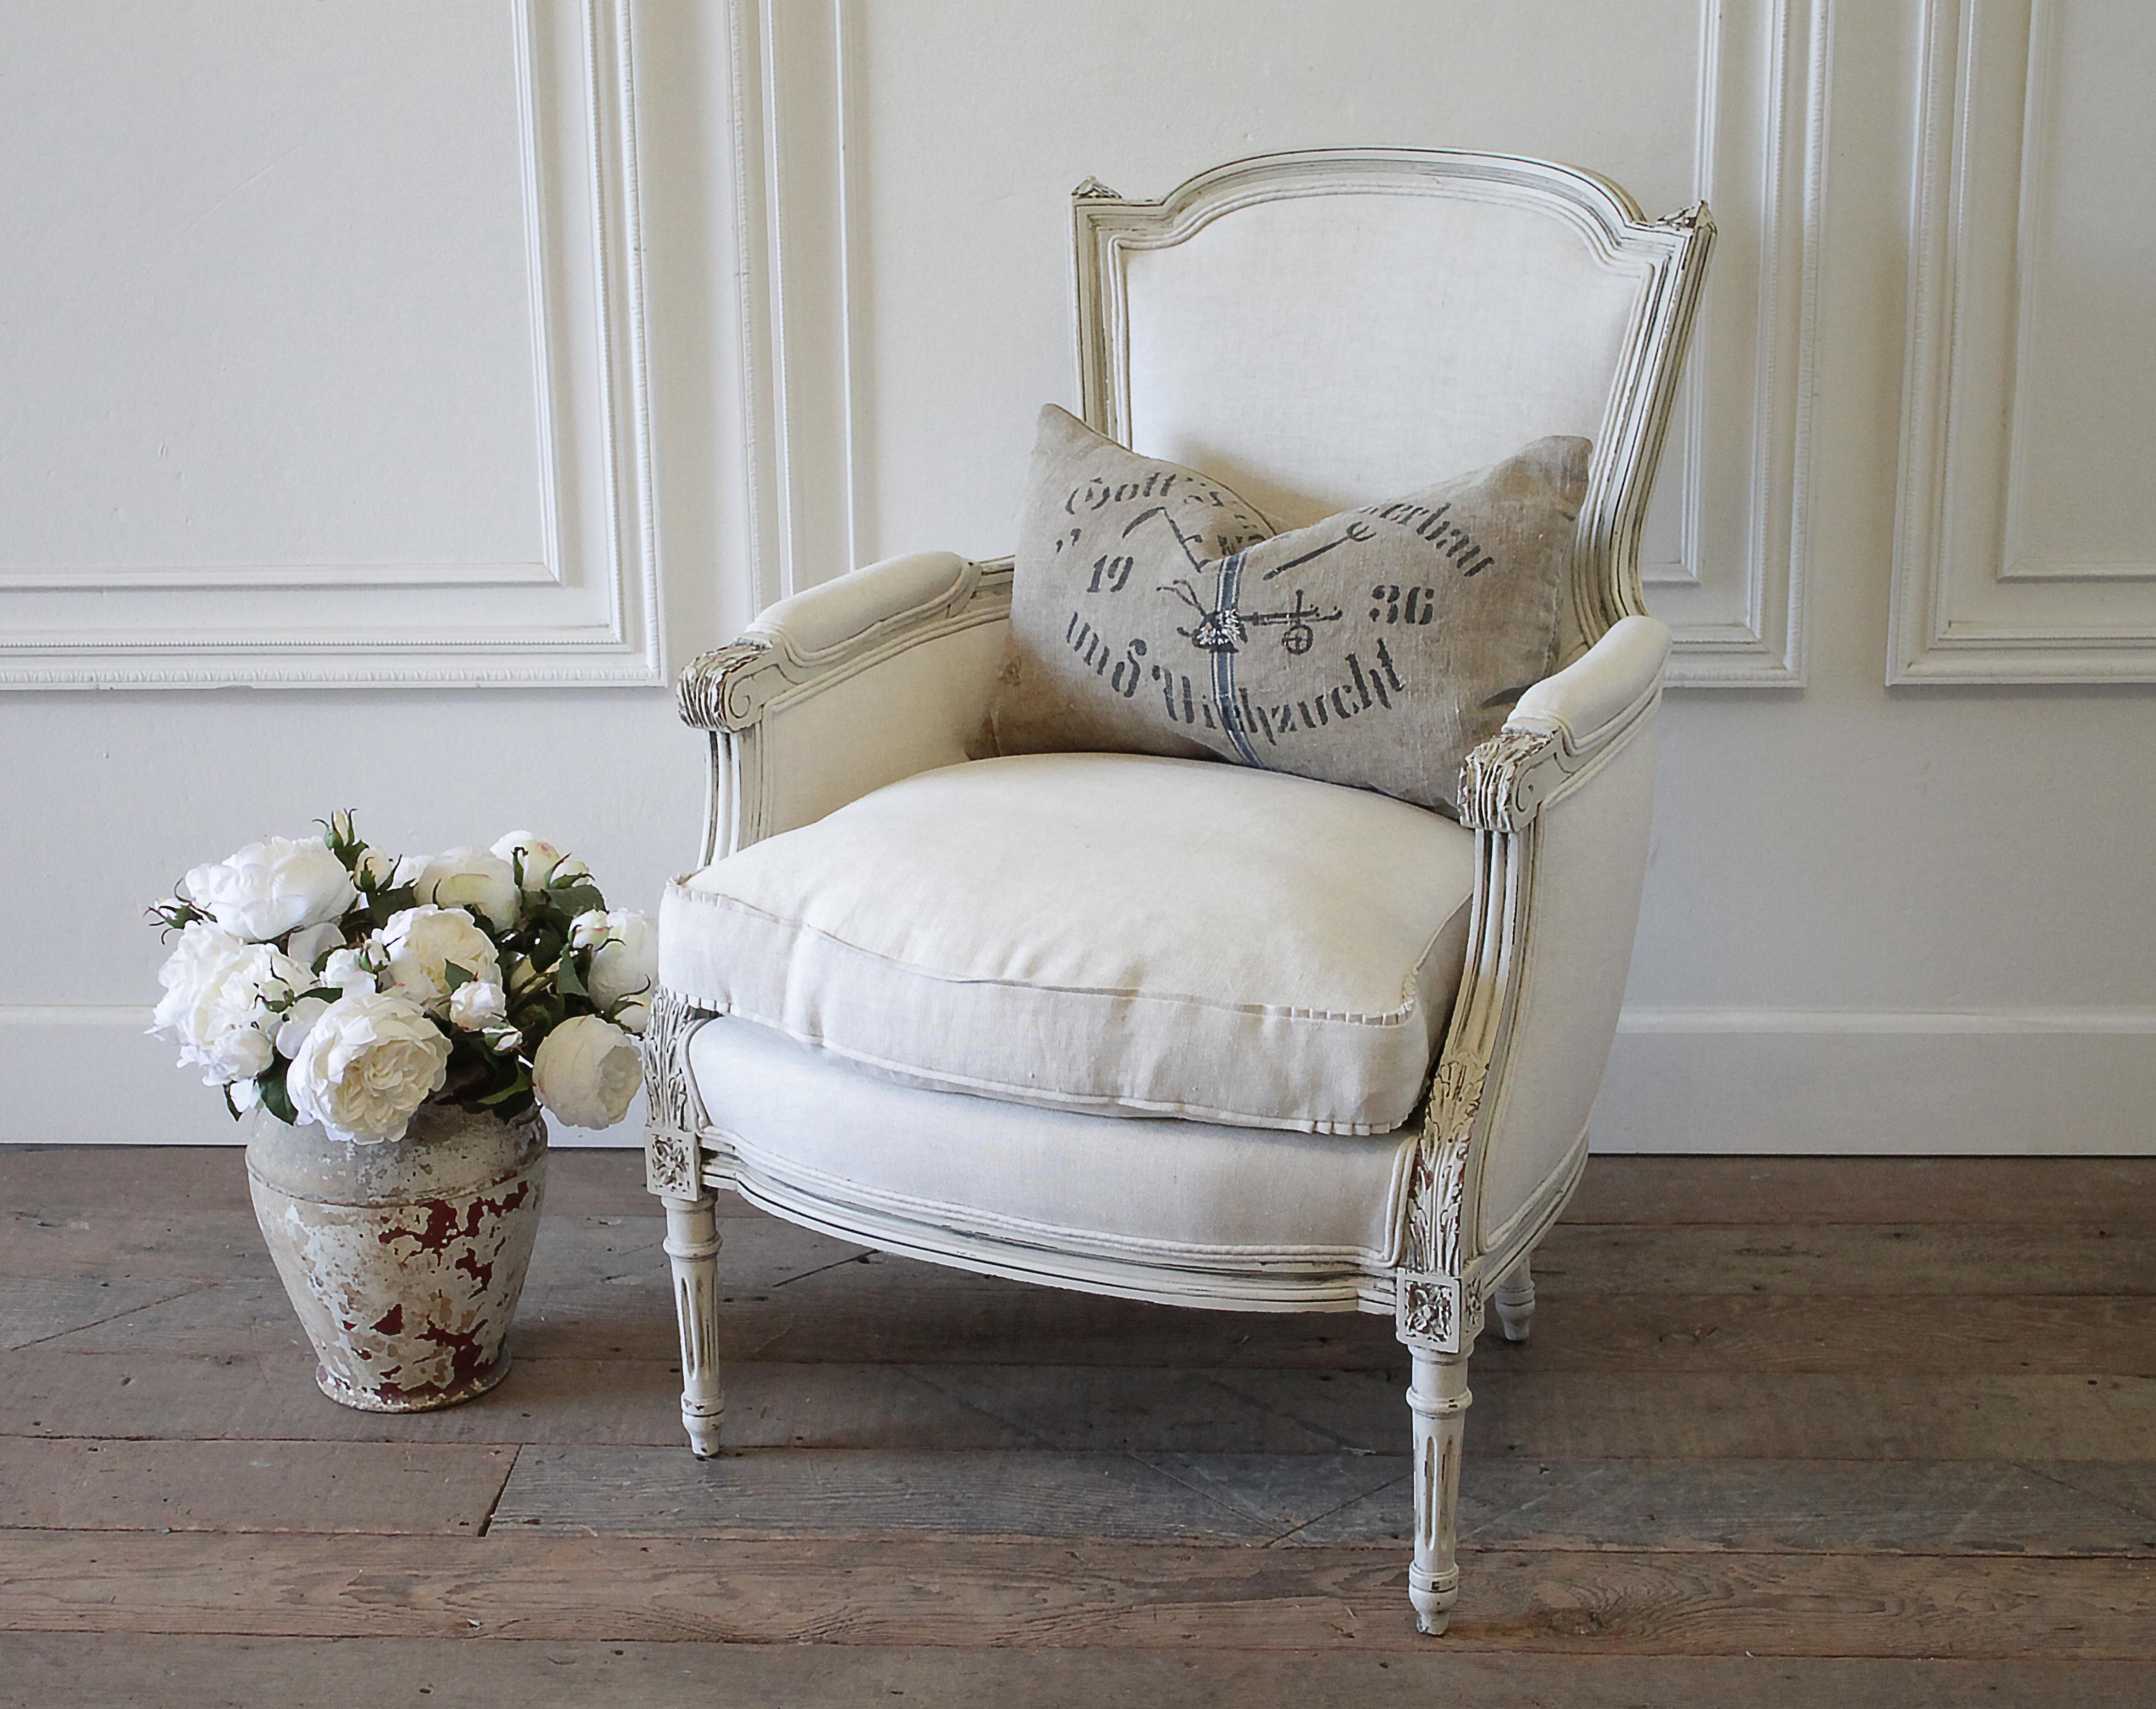 Carved 20th Century Louis XVI Style Painted French Bergere Chair in Natural Linen